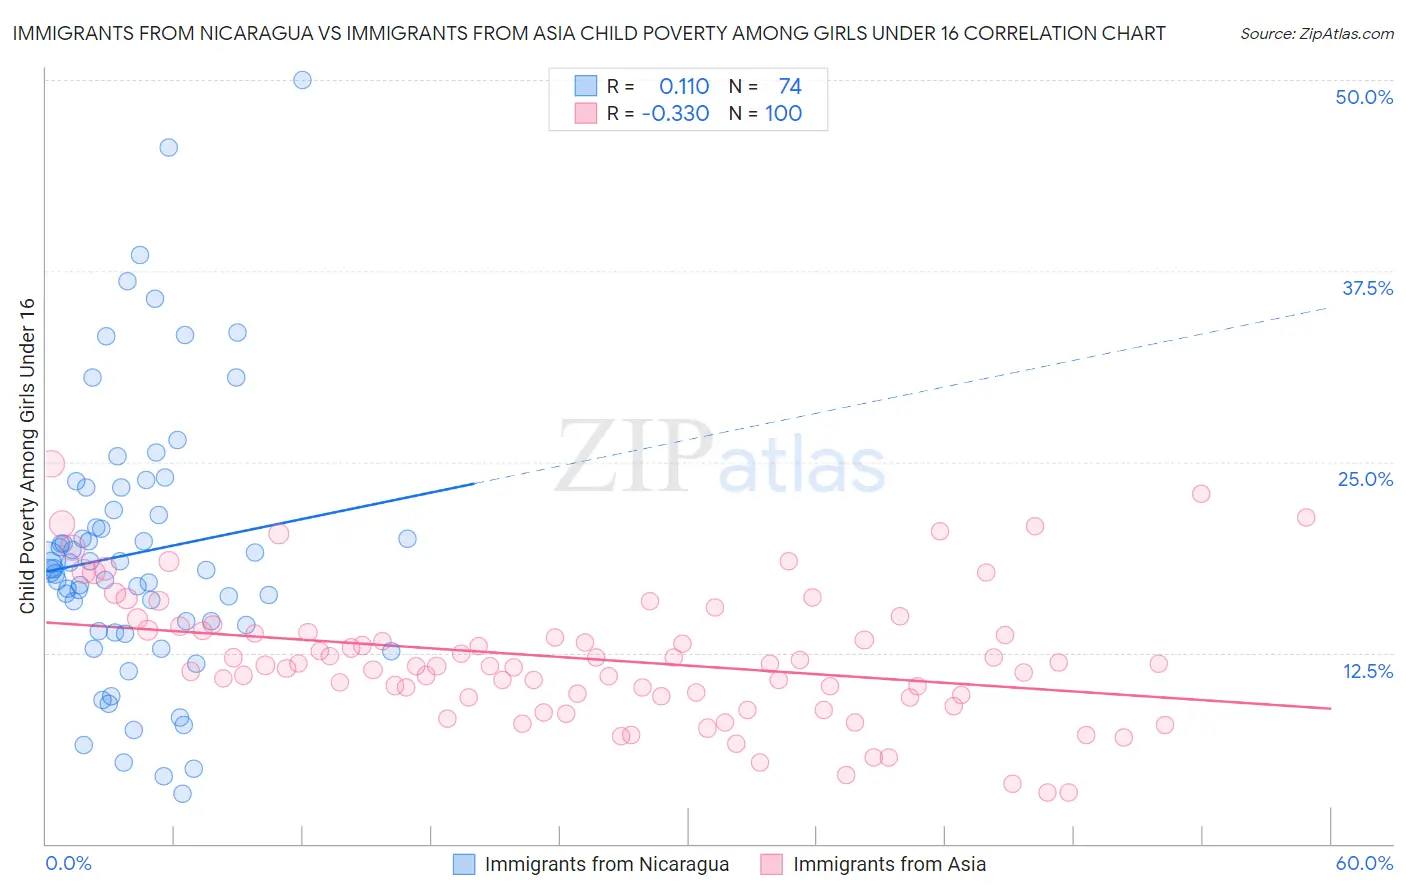 Immigrants from Nicaragua vs Immigrants from Asia Child Poverty Among Girls Under 16